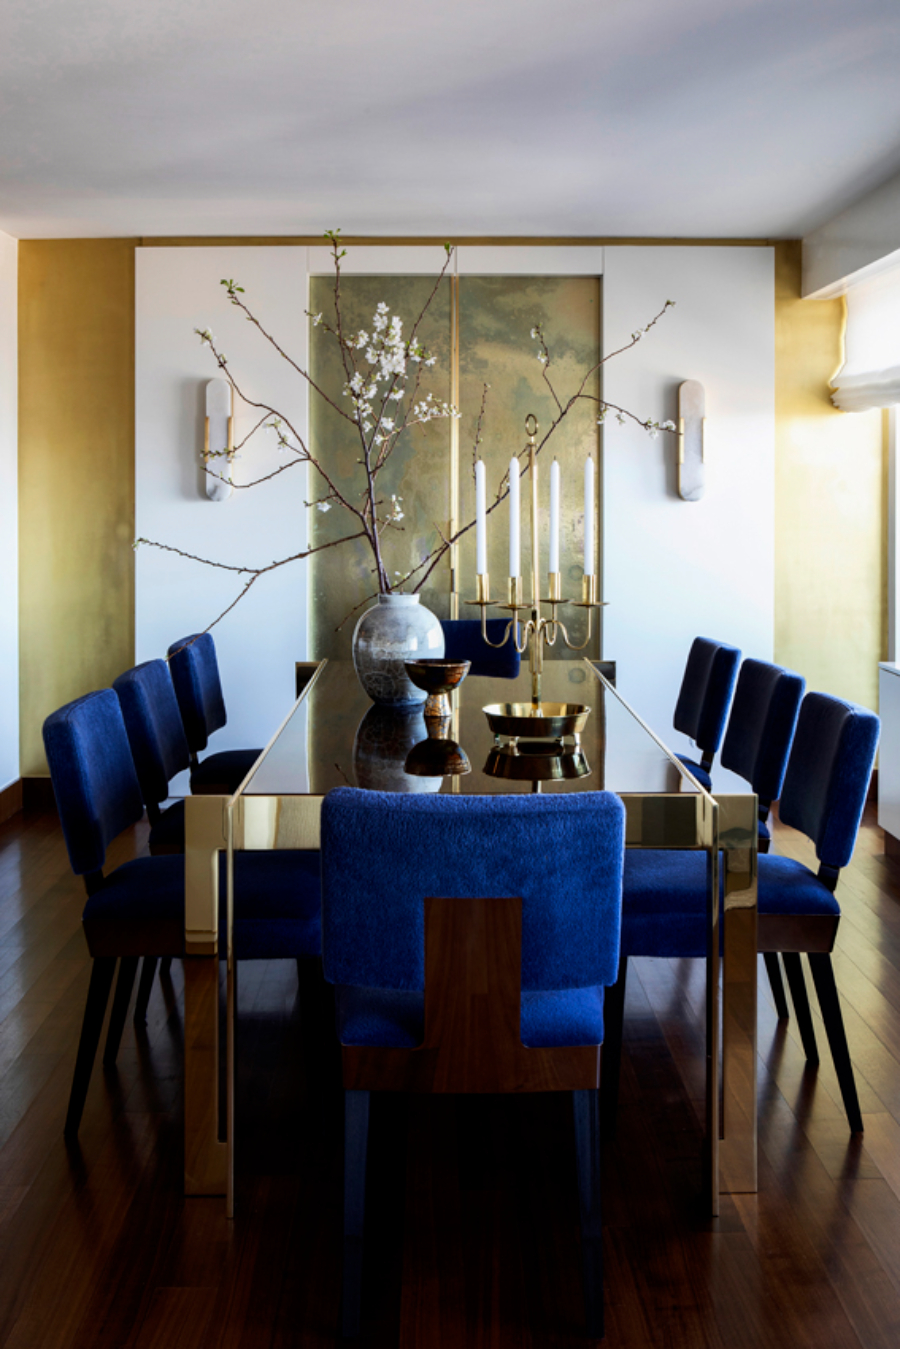 Luxury Interior Design By The Homes Of New York_Lincoln Center Penthouse_Dining Room luxury interior design Luxury Interior Design By The Homes Of New York Luxury Interior Design By The Homes Of New York Lincoln Center Penthouse Dining Room